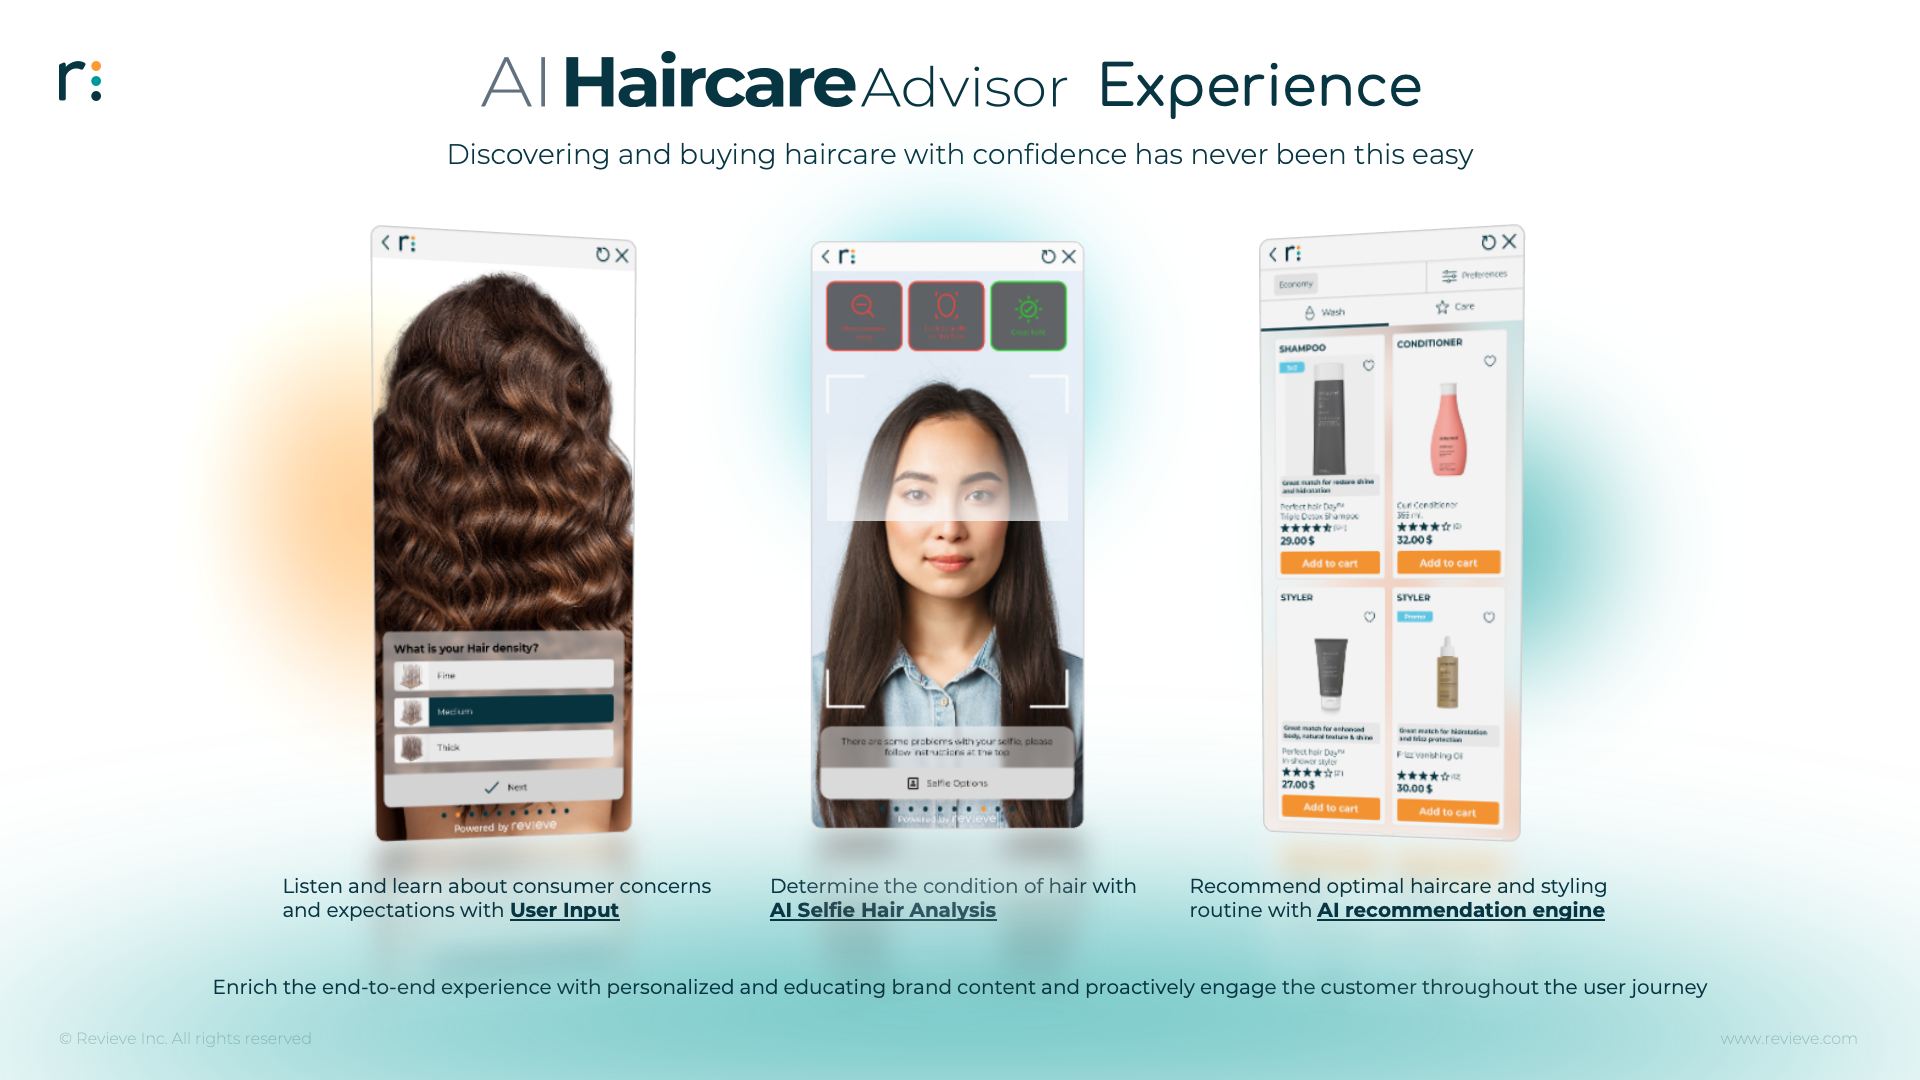 The AI hair care advisor tool has been designed to use on a mobile and provide accessible insight [Image: Revieve]